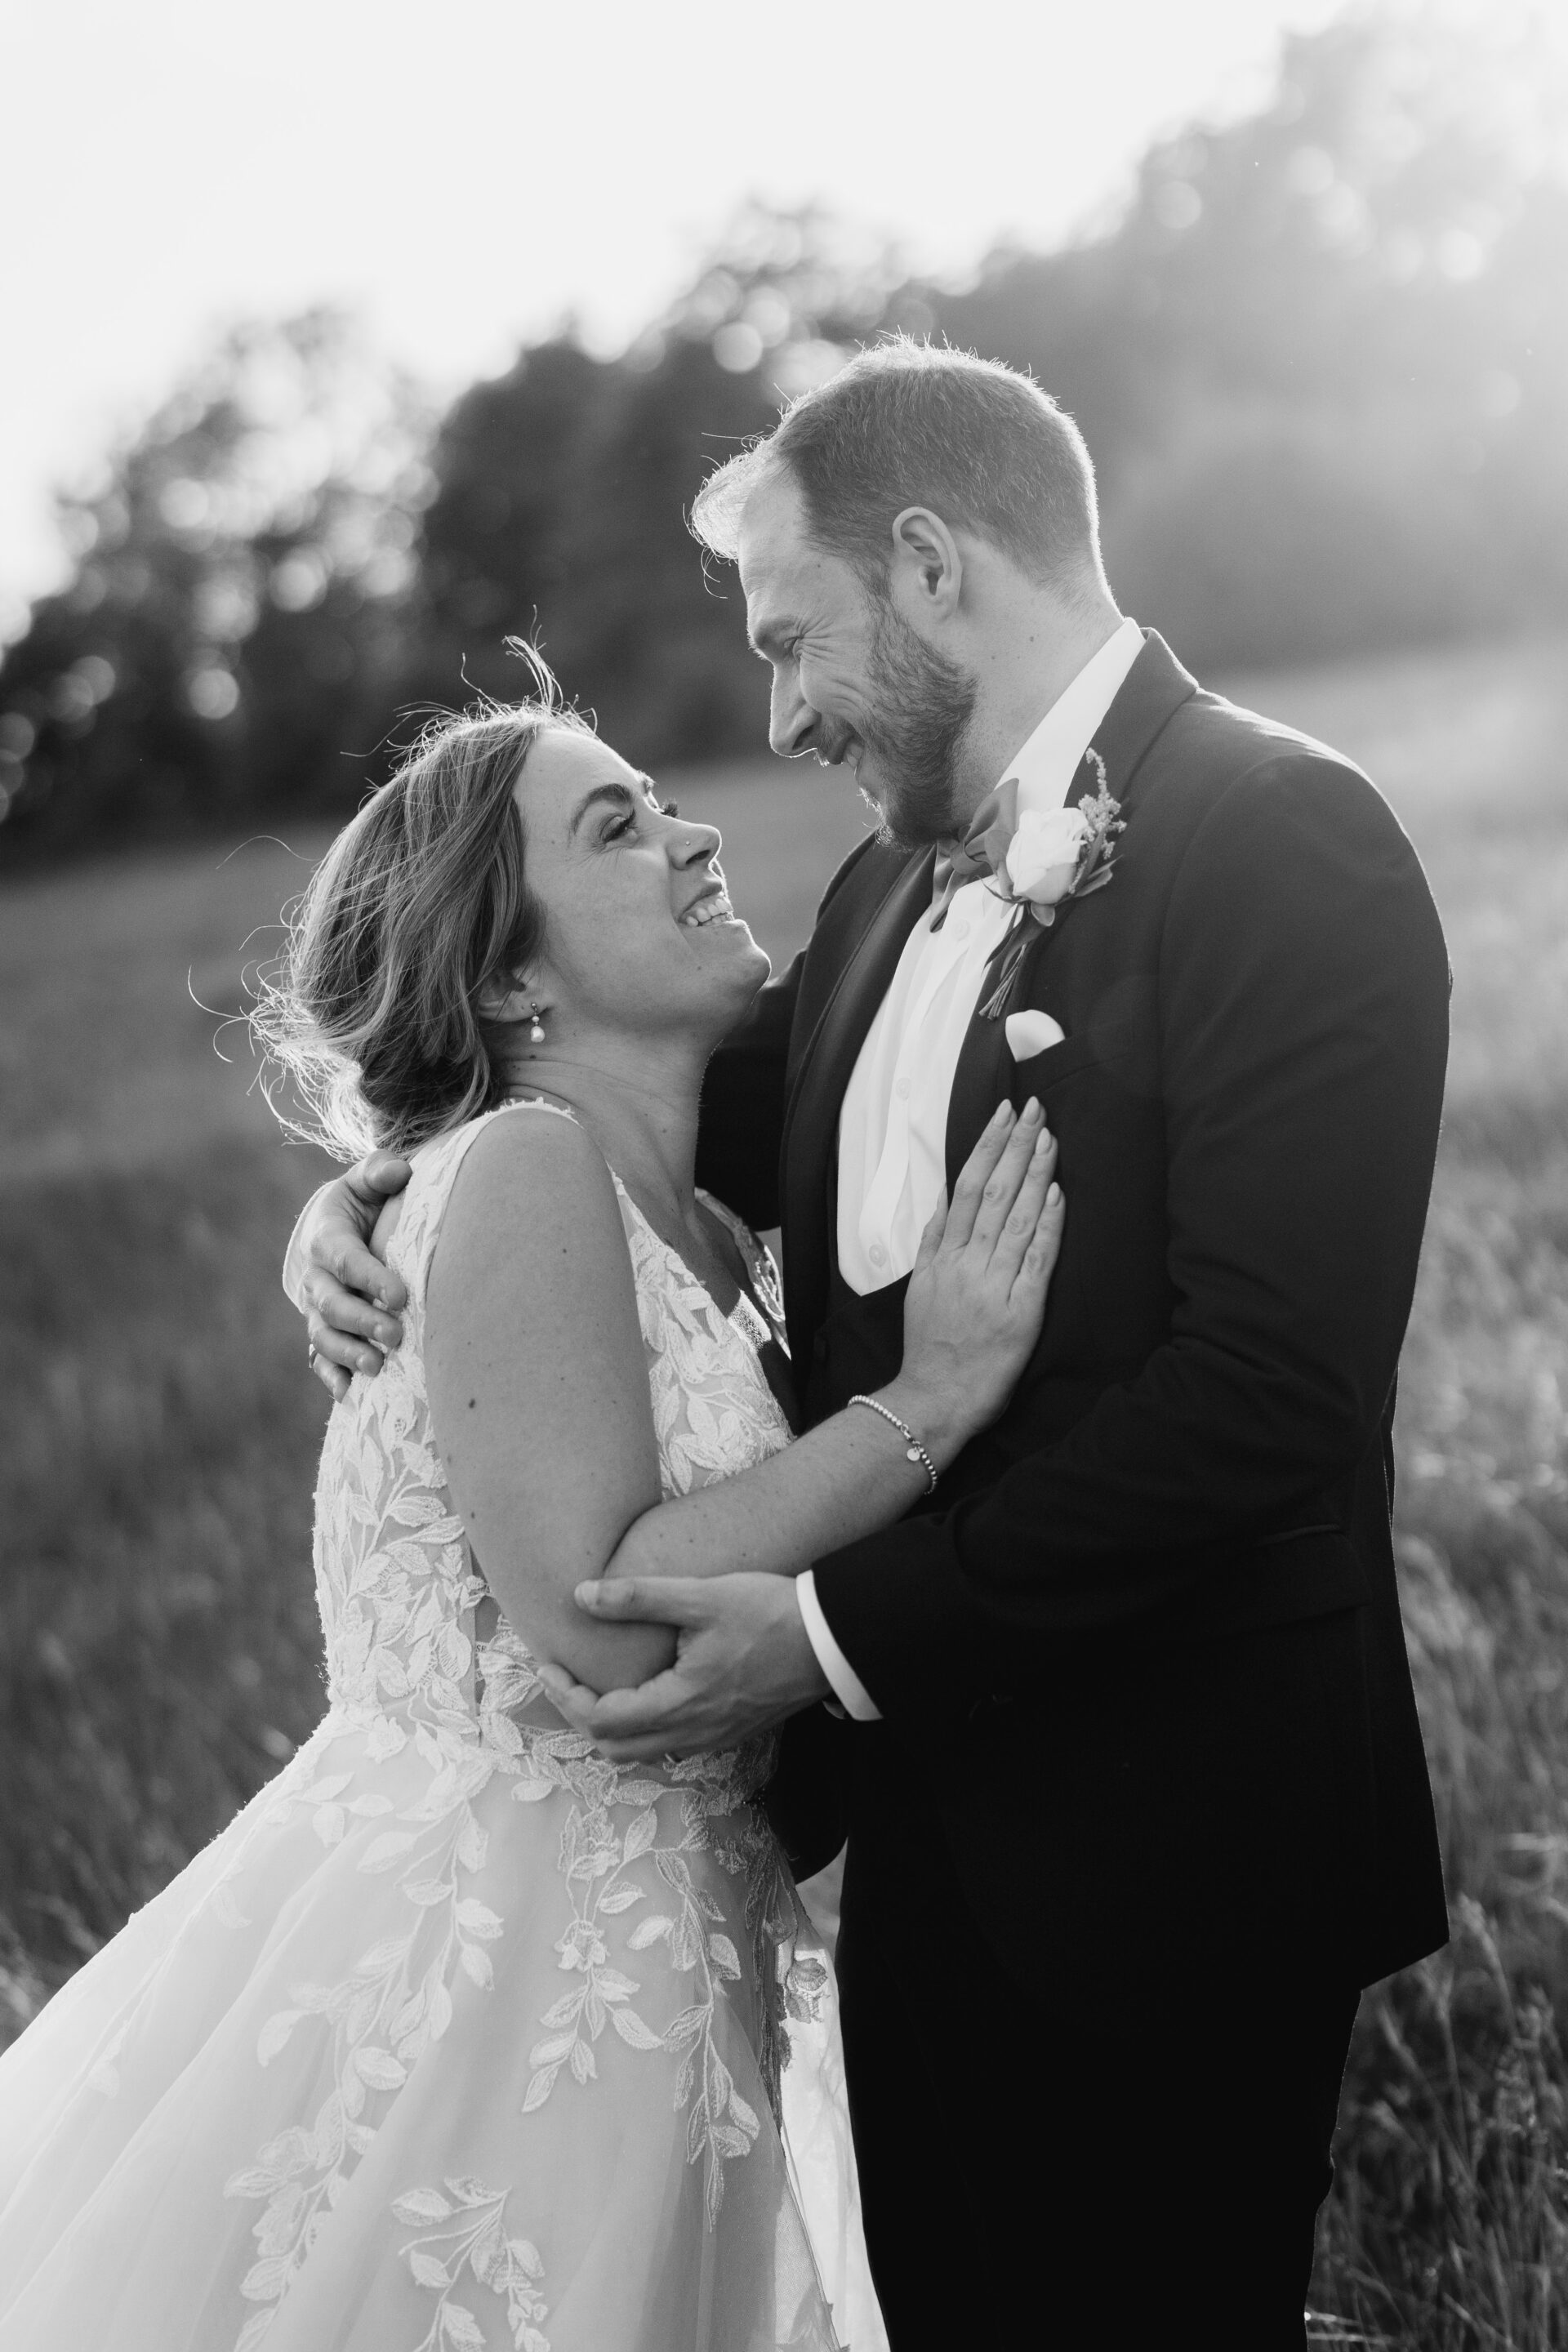 The bride and groom share a laugh during their couples portrait session